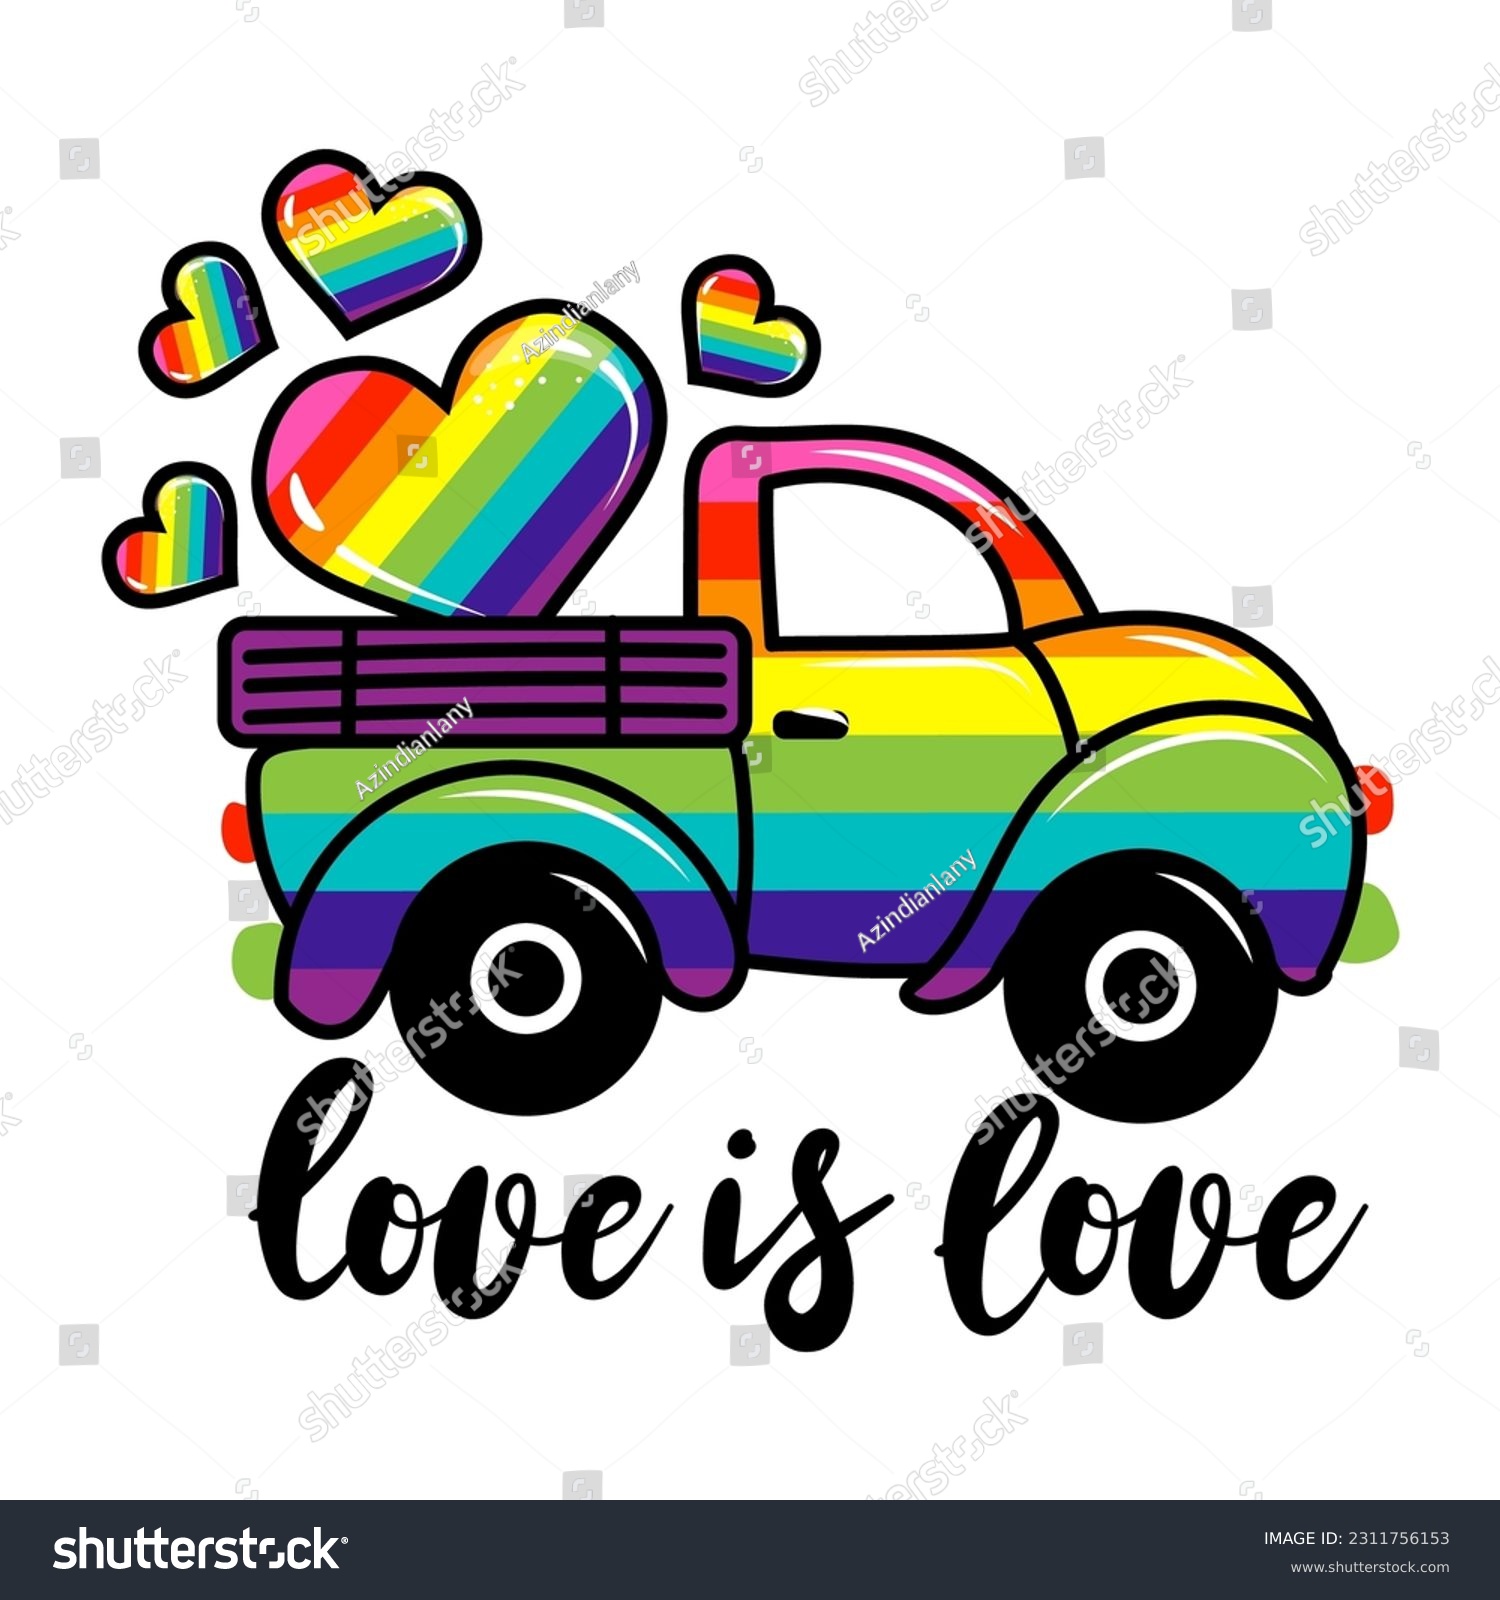 SVG of Love is love - LGBT pride slogan against homosexual discrimination. Modern calligraphy with rainbow colored characters. Good for scrap booking, posters, textiles, gifts, pride sets. svg